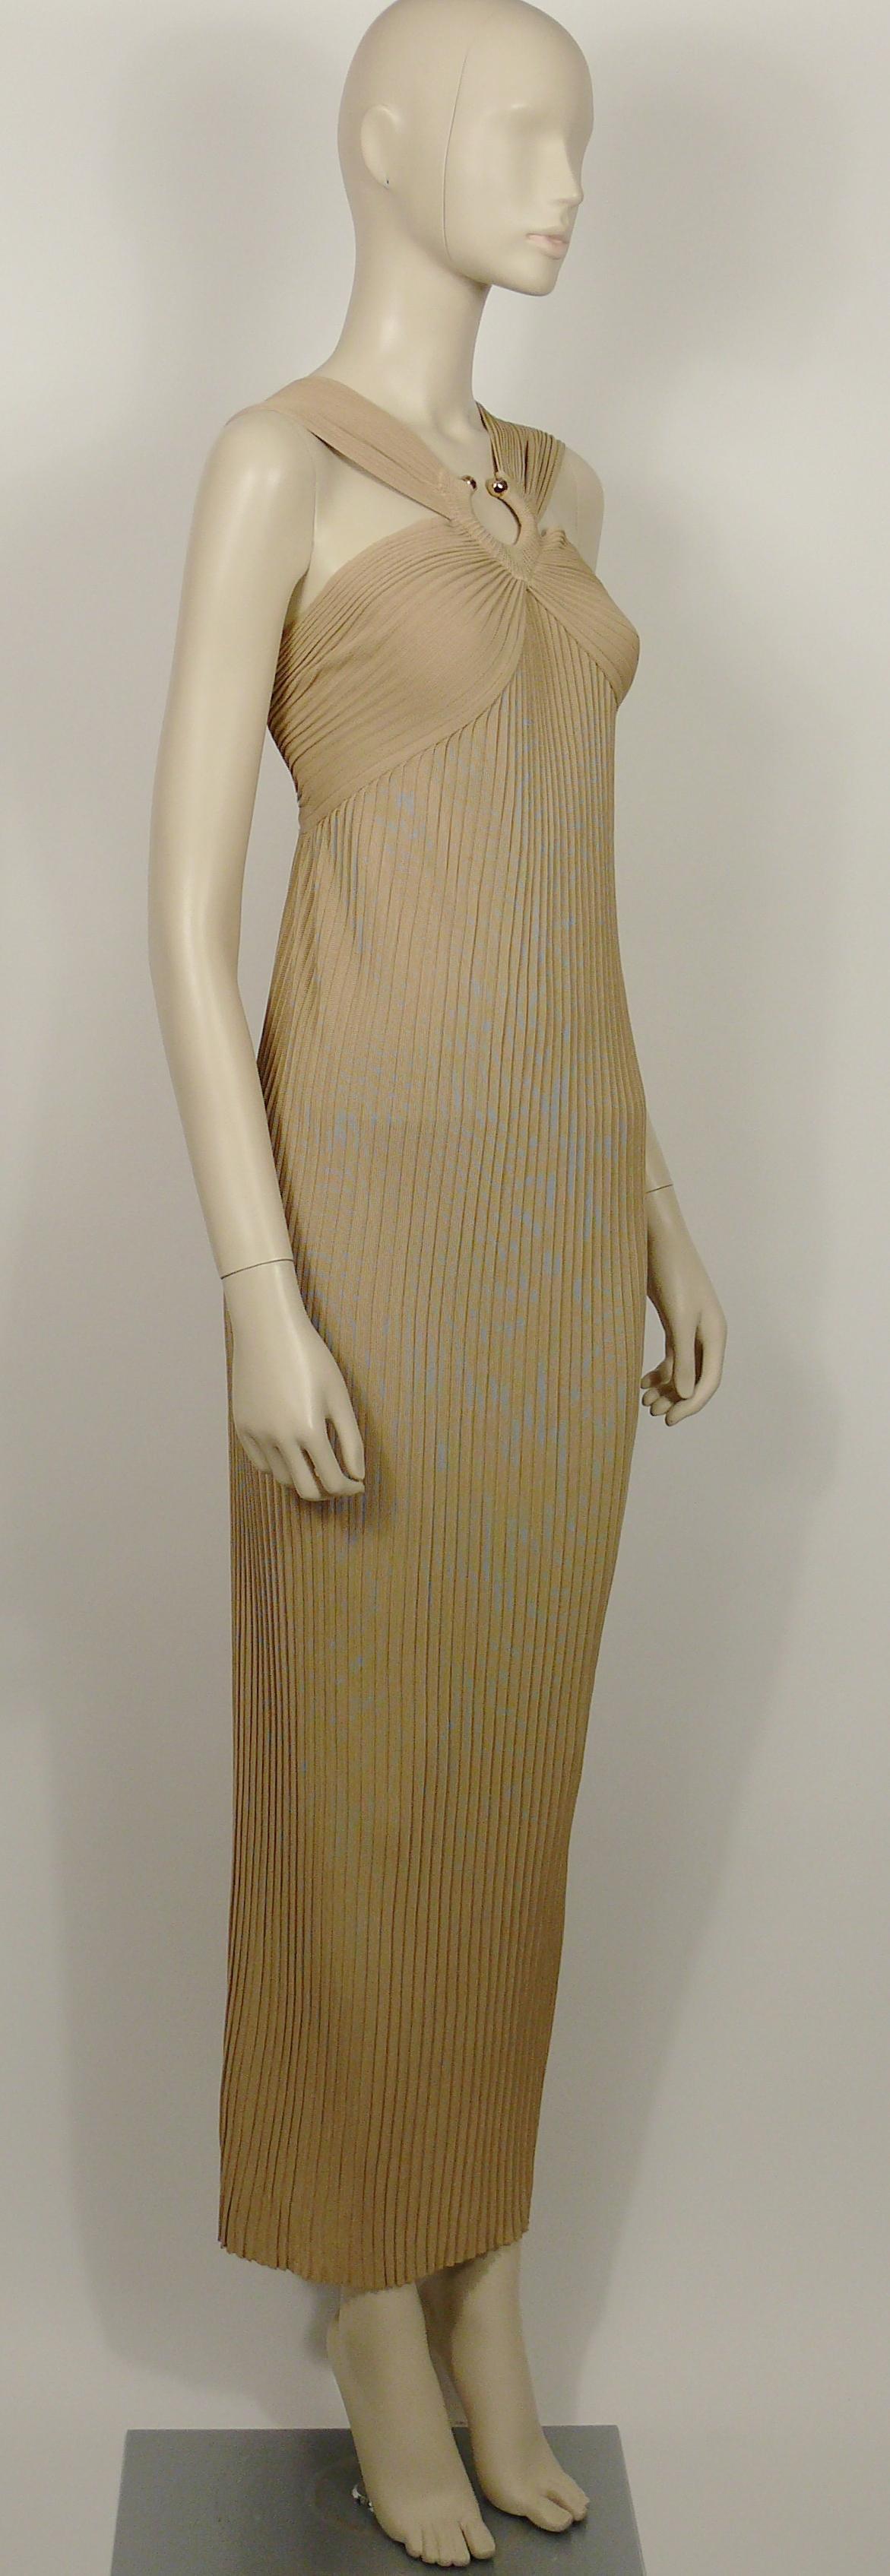 THIERRY MUGLER vintage beige viscose ribbed knit goddess dress embellished with an hammered gold toned ring detail.

Slips on.
Has stretch.
No lining.

Label reads THIERRY MUGLER Paris Made in Italy.

Size label reads : S.
Please refer to